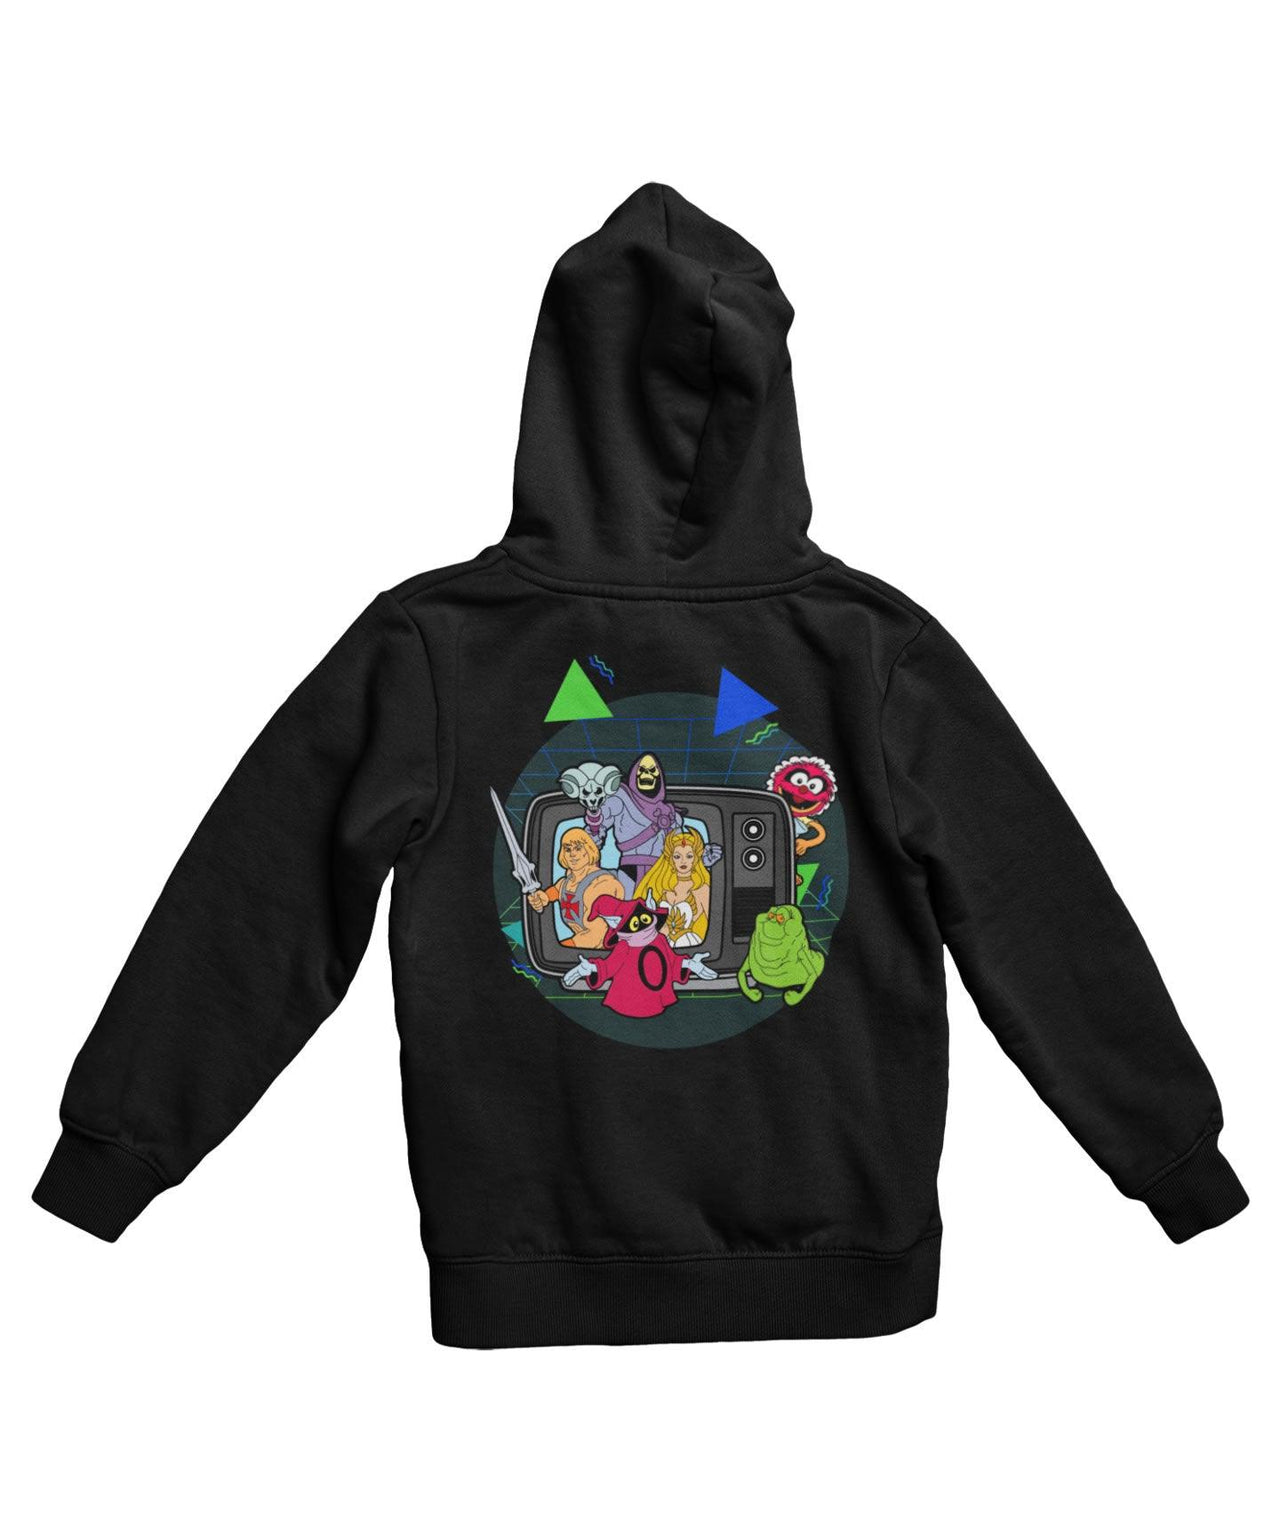 Top Notchy TV Toon Number 3 Back Printed Hoodie For Men and Women 8Ball